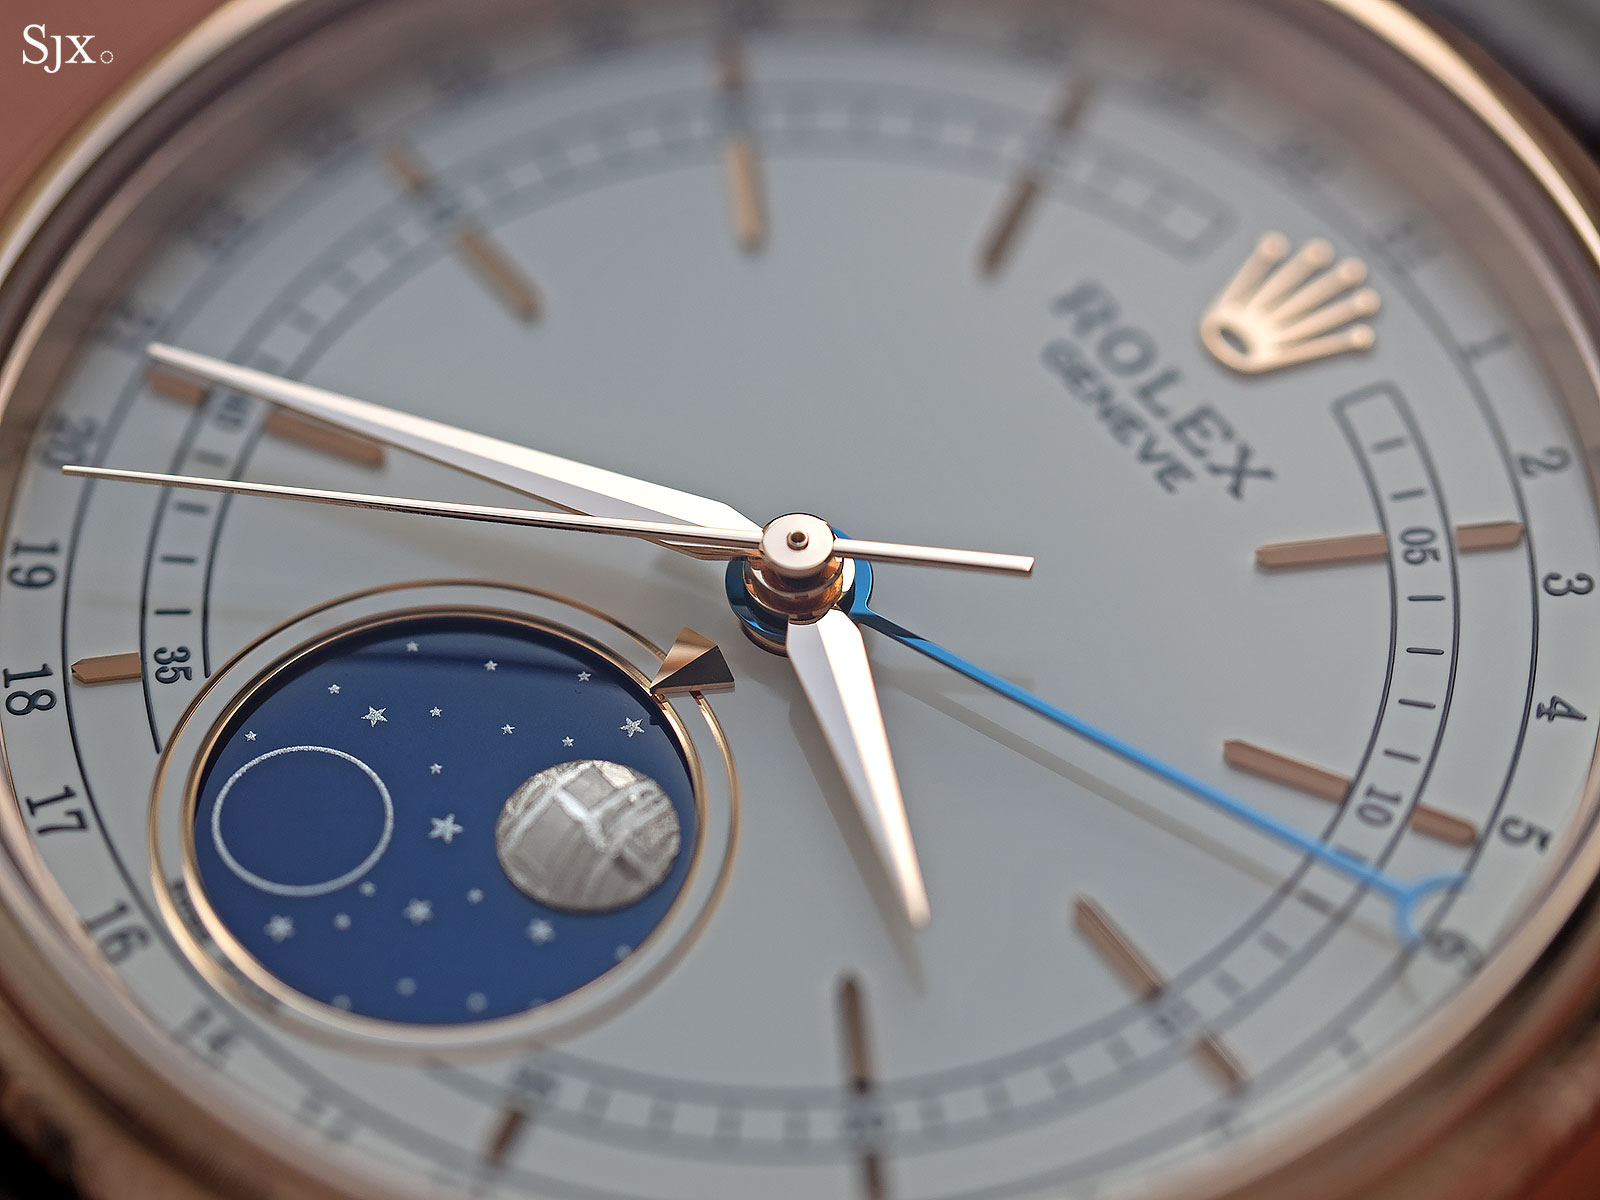 Rolex Cellini Moonphase 50535 review 14